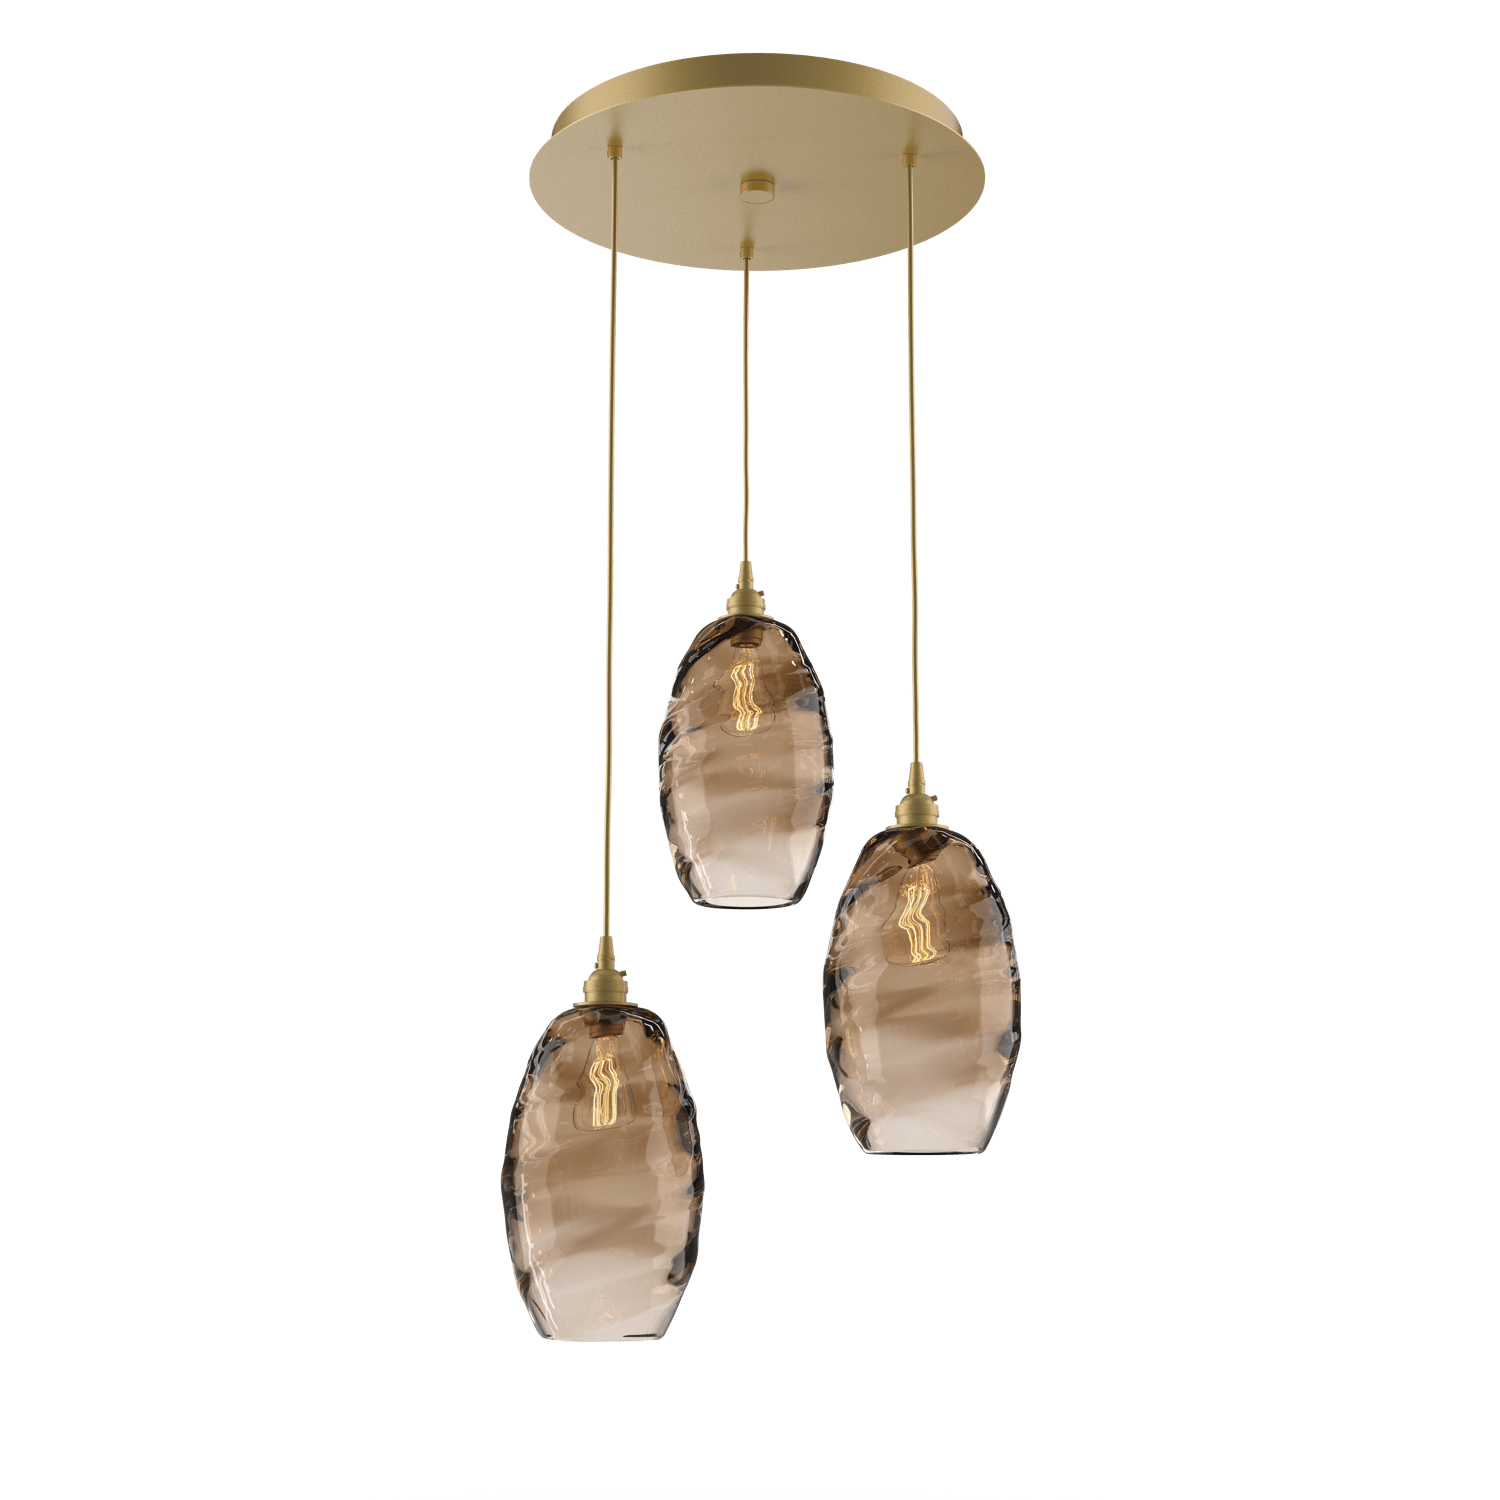 CHB0035-03-GB-OB-Hammerton-Studio-Optic-Blown-Glass-Elisse-3-light-round-pendant-chandelier-with-gilded-brass-finish-and-optic-bronze-blown-glass-shades-and-incandescent-lamping